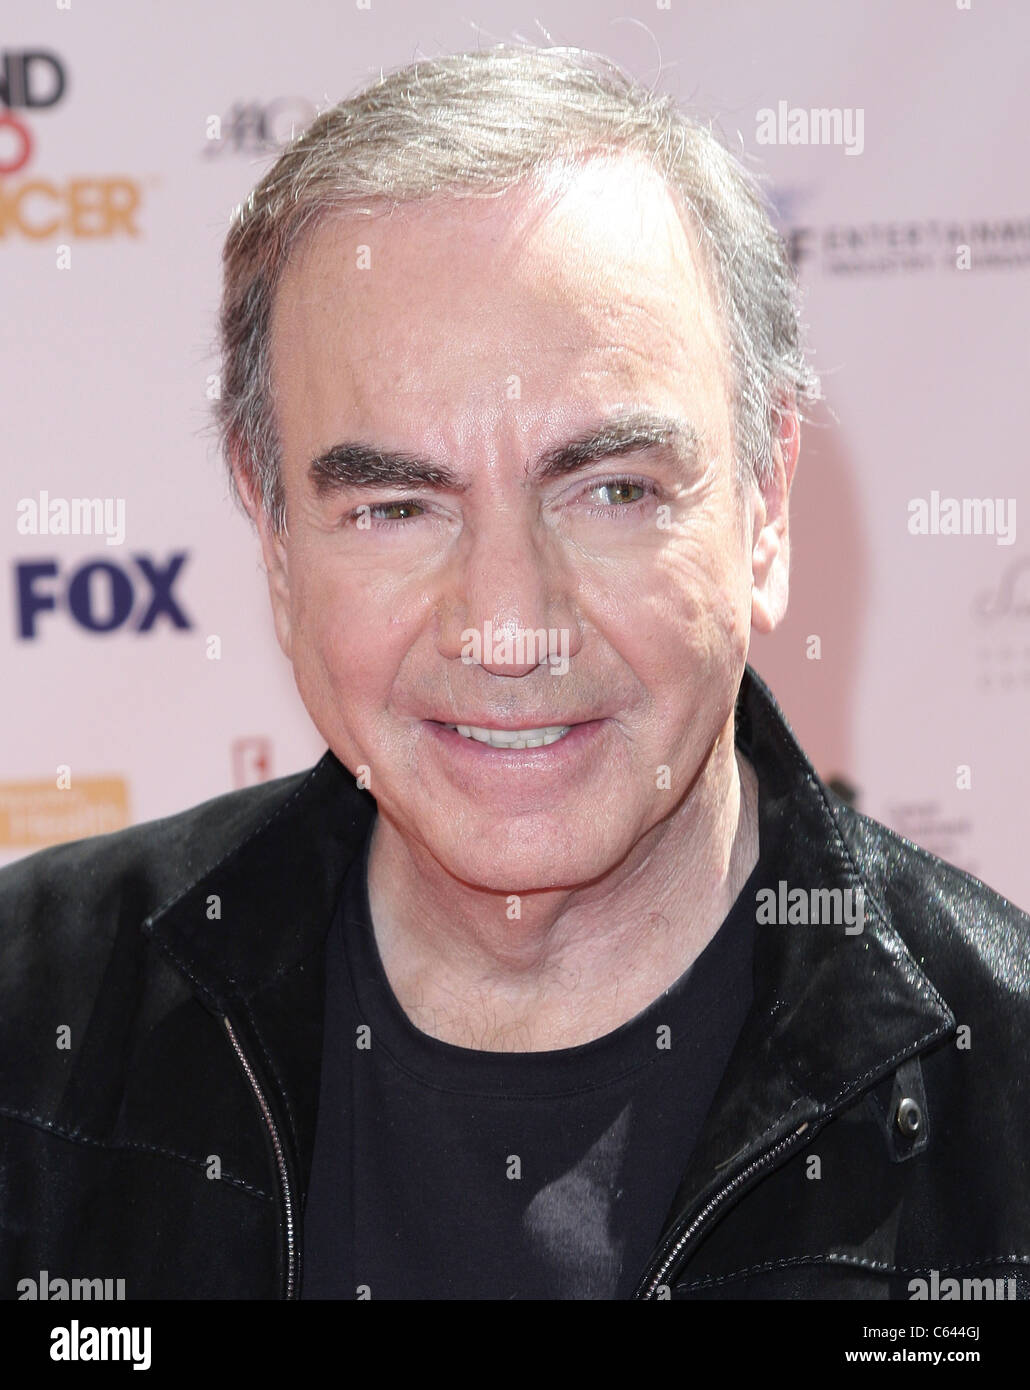 Neil Diamond in attendance for Stand Up To Cancer Fundraiser, Sony Pictures Studios, Los Angeles, CA September 10, 2010. Photo By: Adam Orchon/Everett Collection Stock Photo